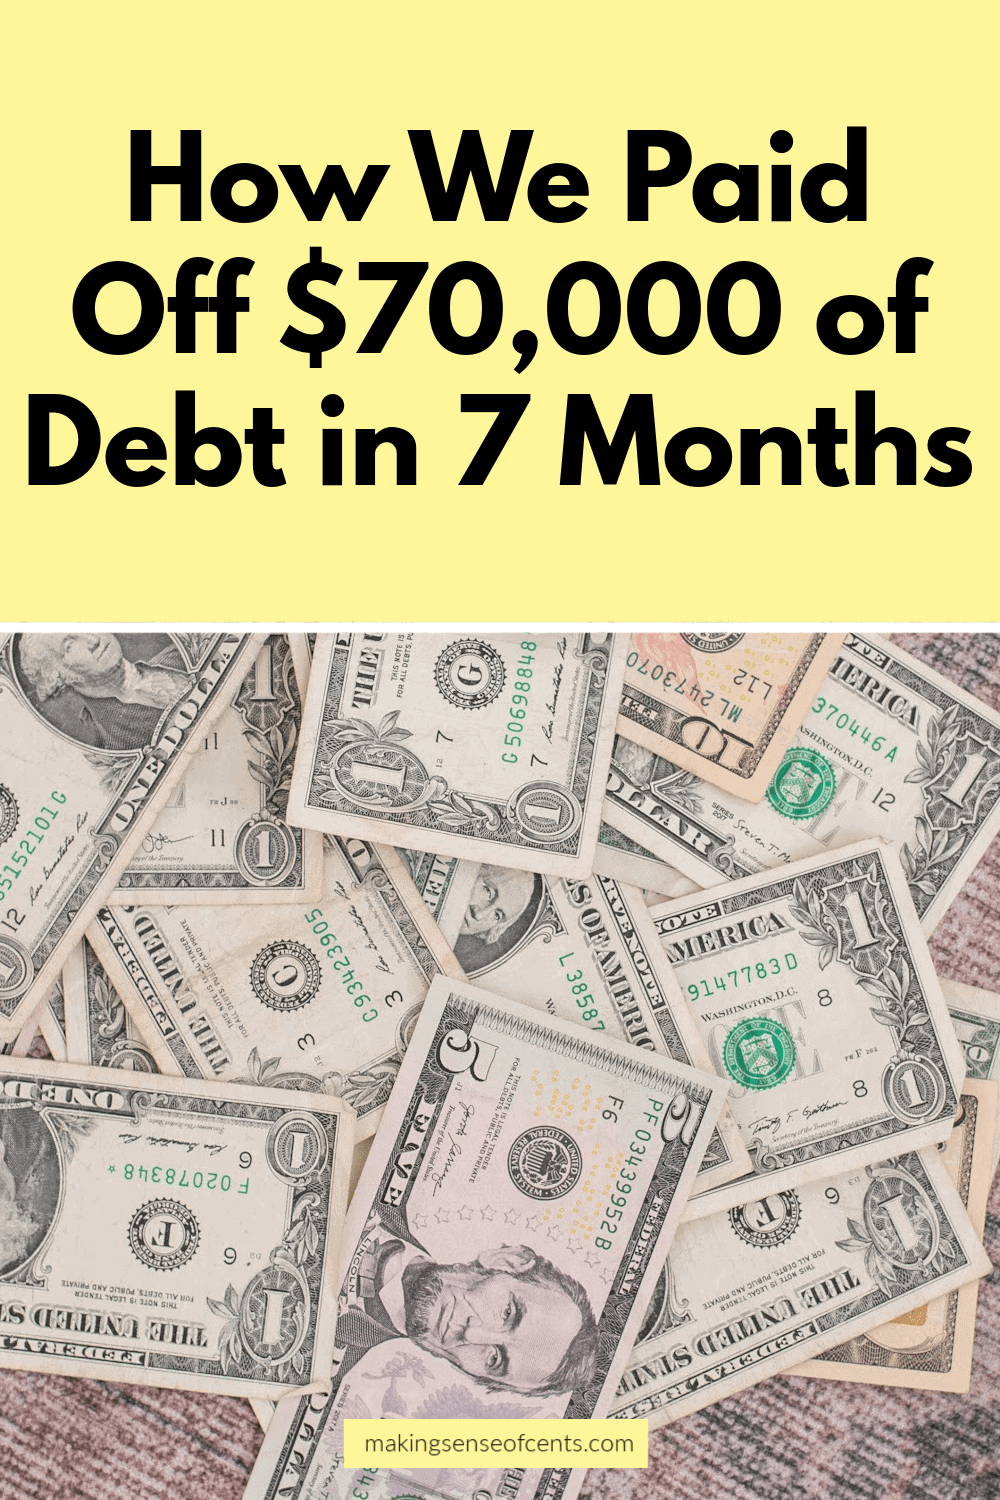 How We Paid Off $70,000 of Debt in 7 Months - Making Sense Of Cents